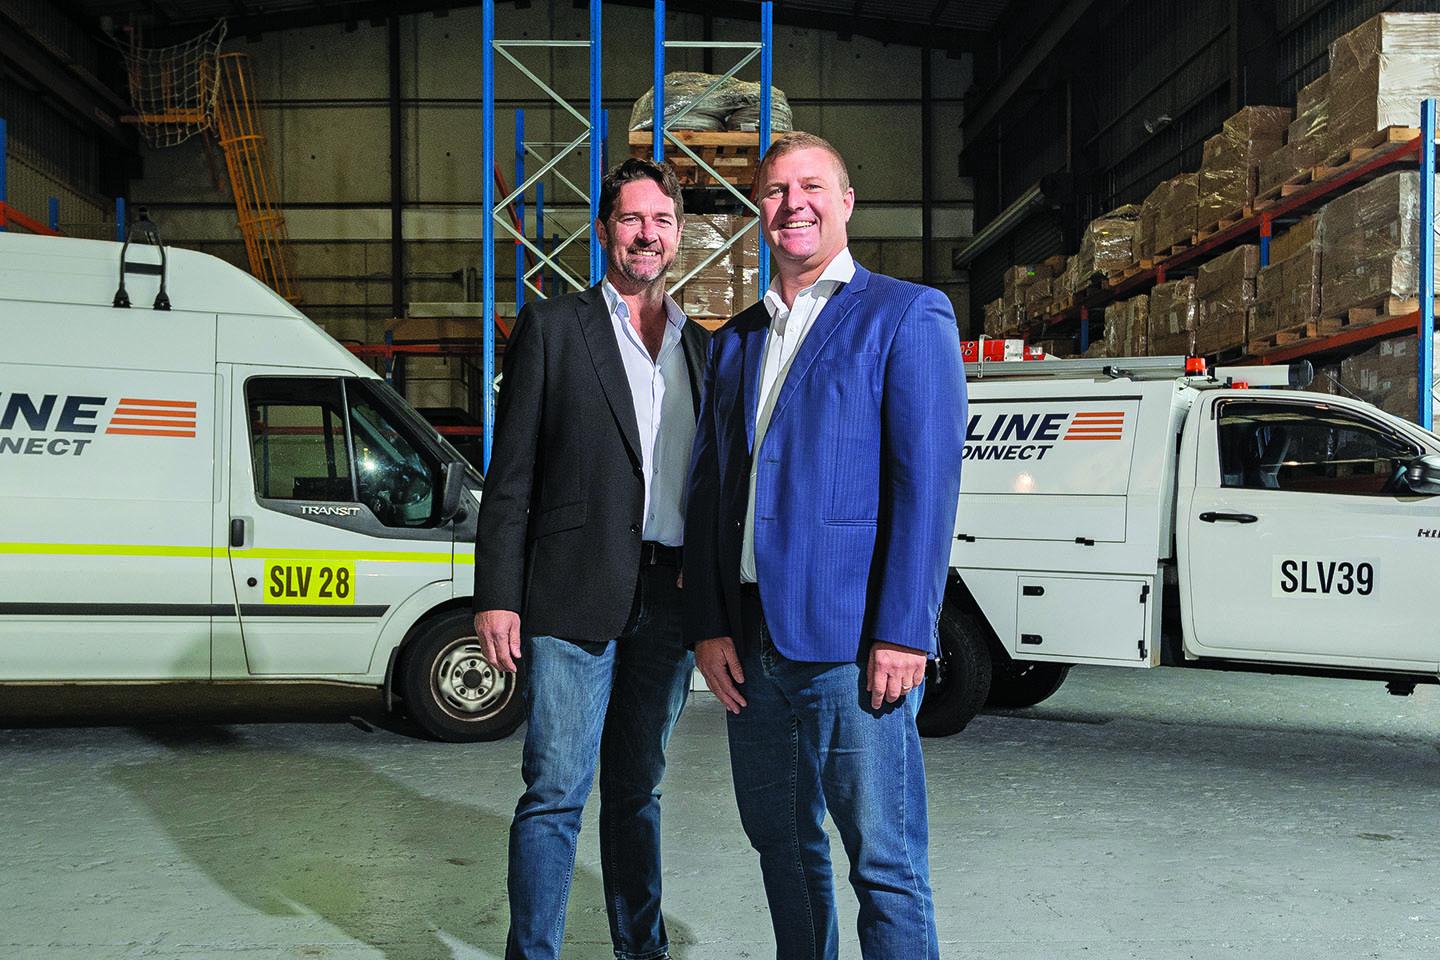 Contractors chase network opportunities